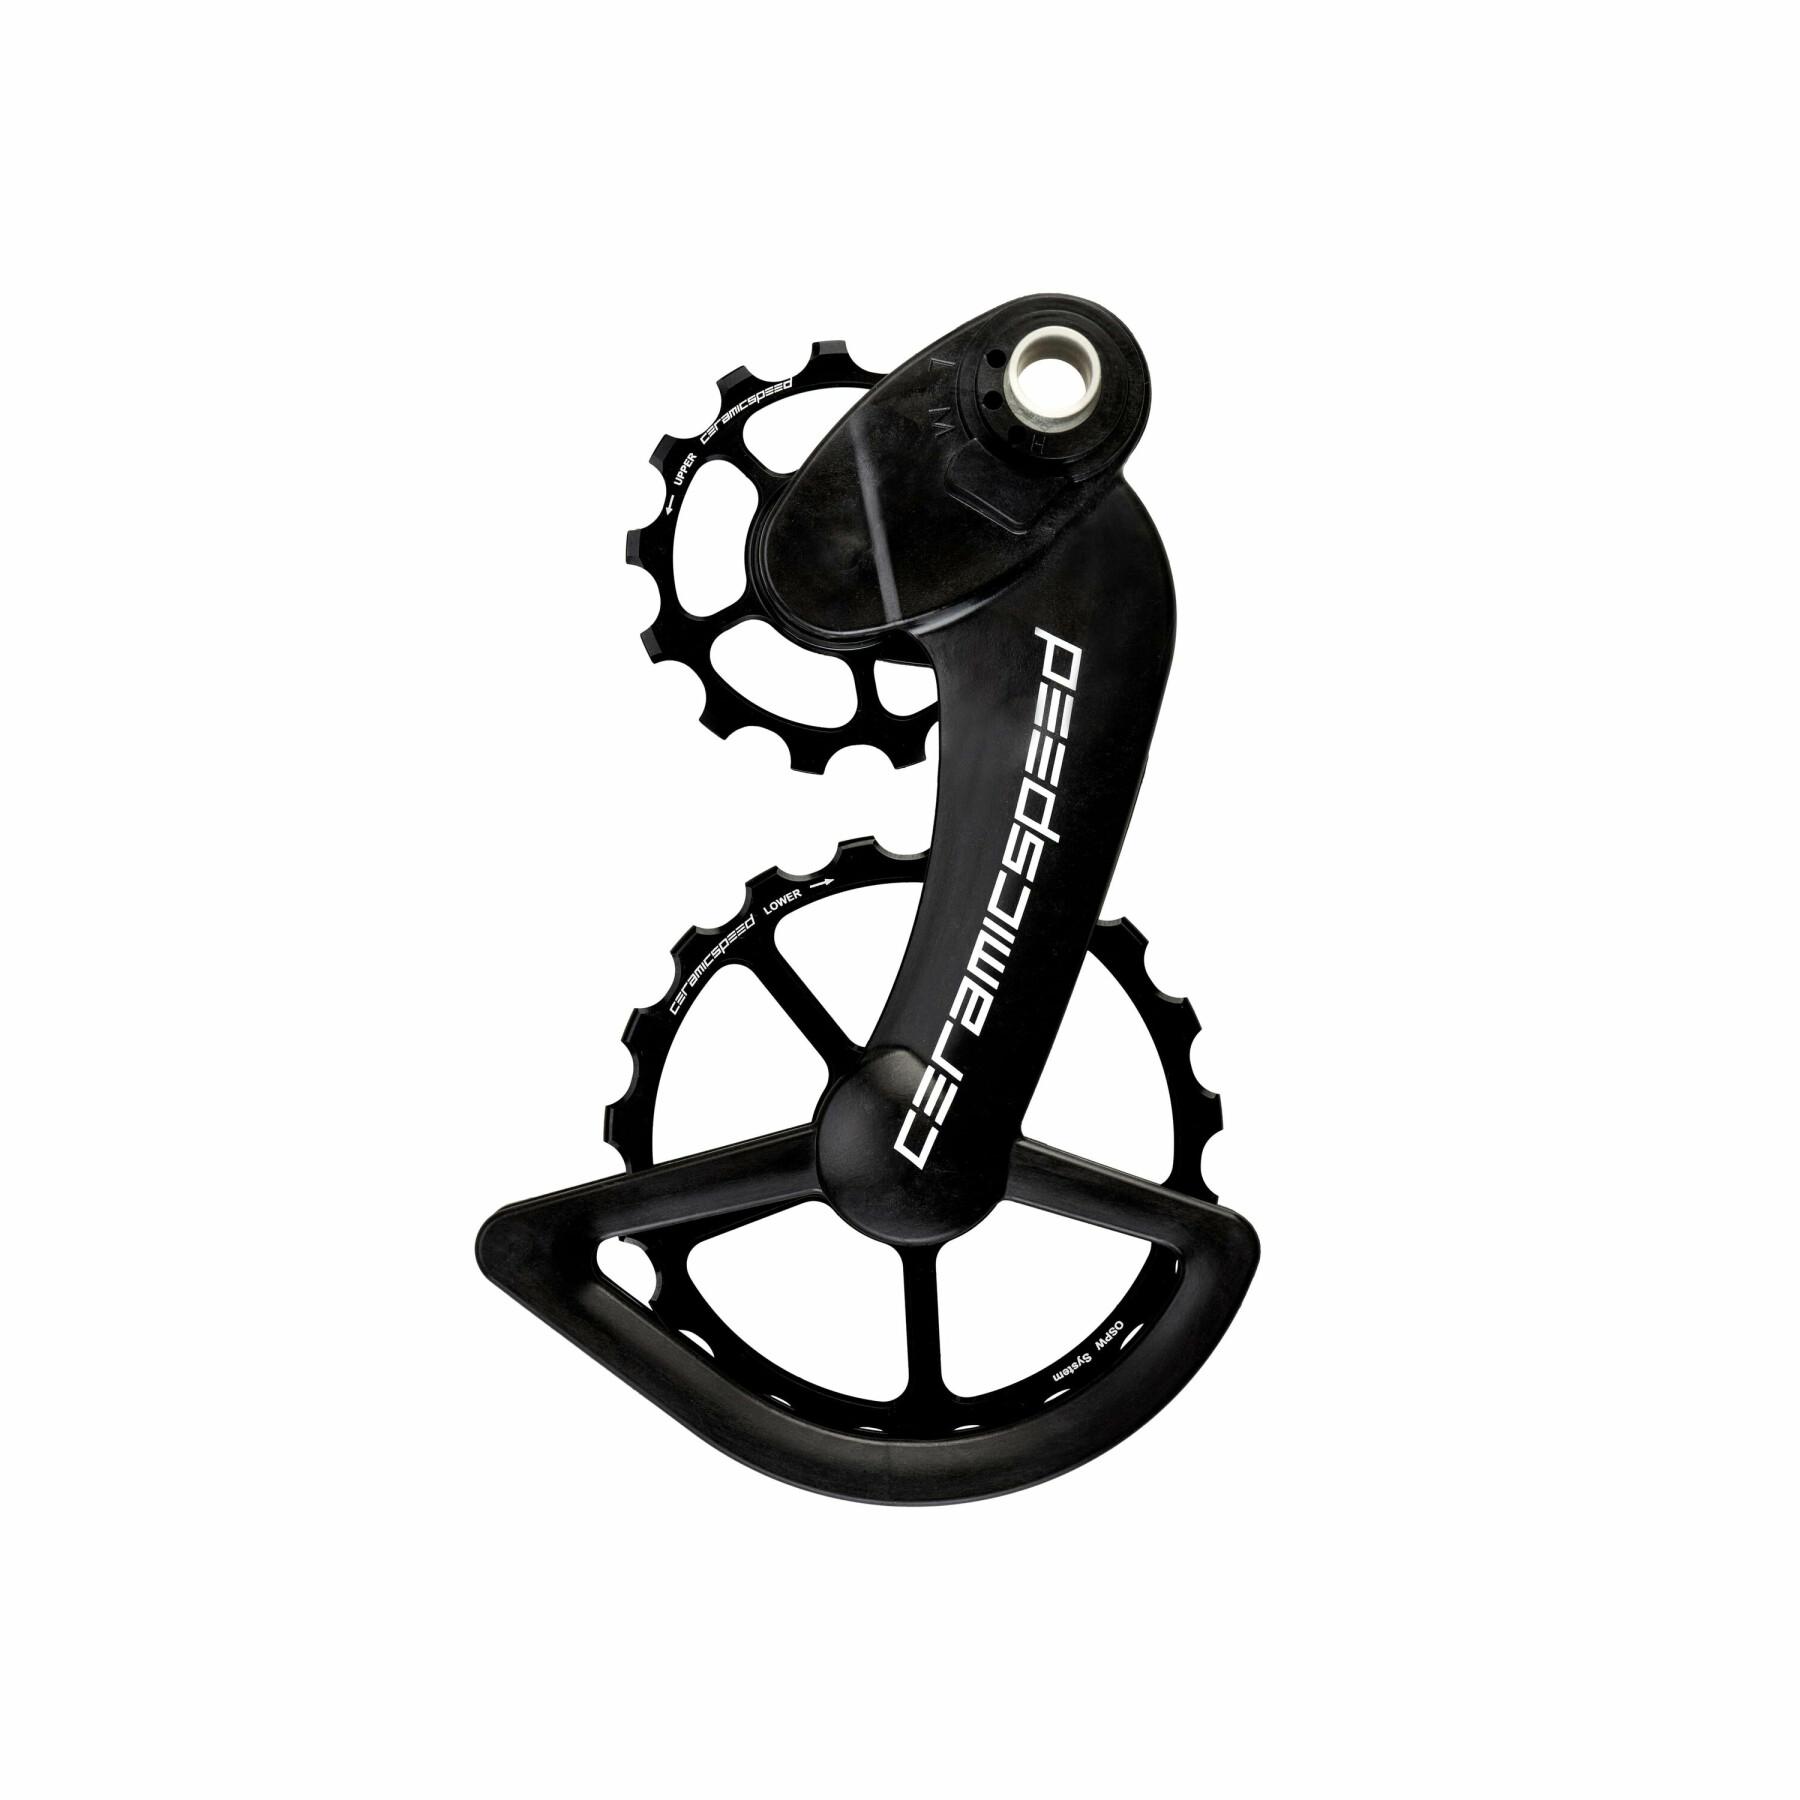 Screed CeramicSpeed OSPW Campagnolo 12v eps black alloy 607 stainless steel